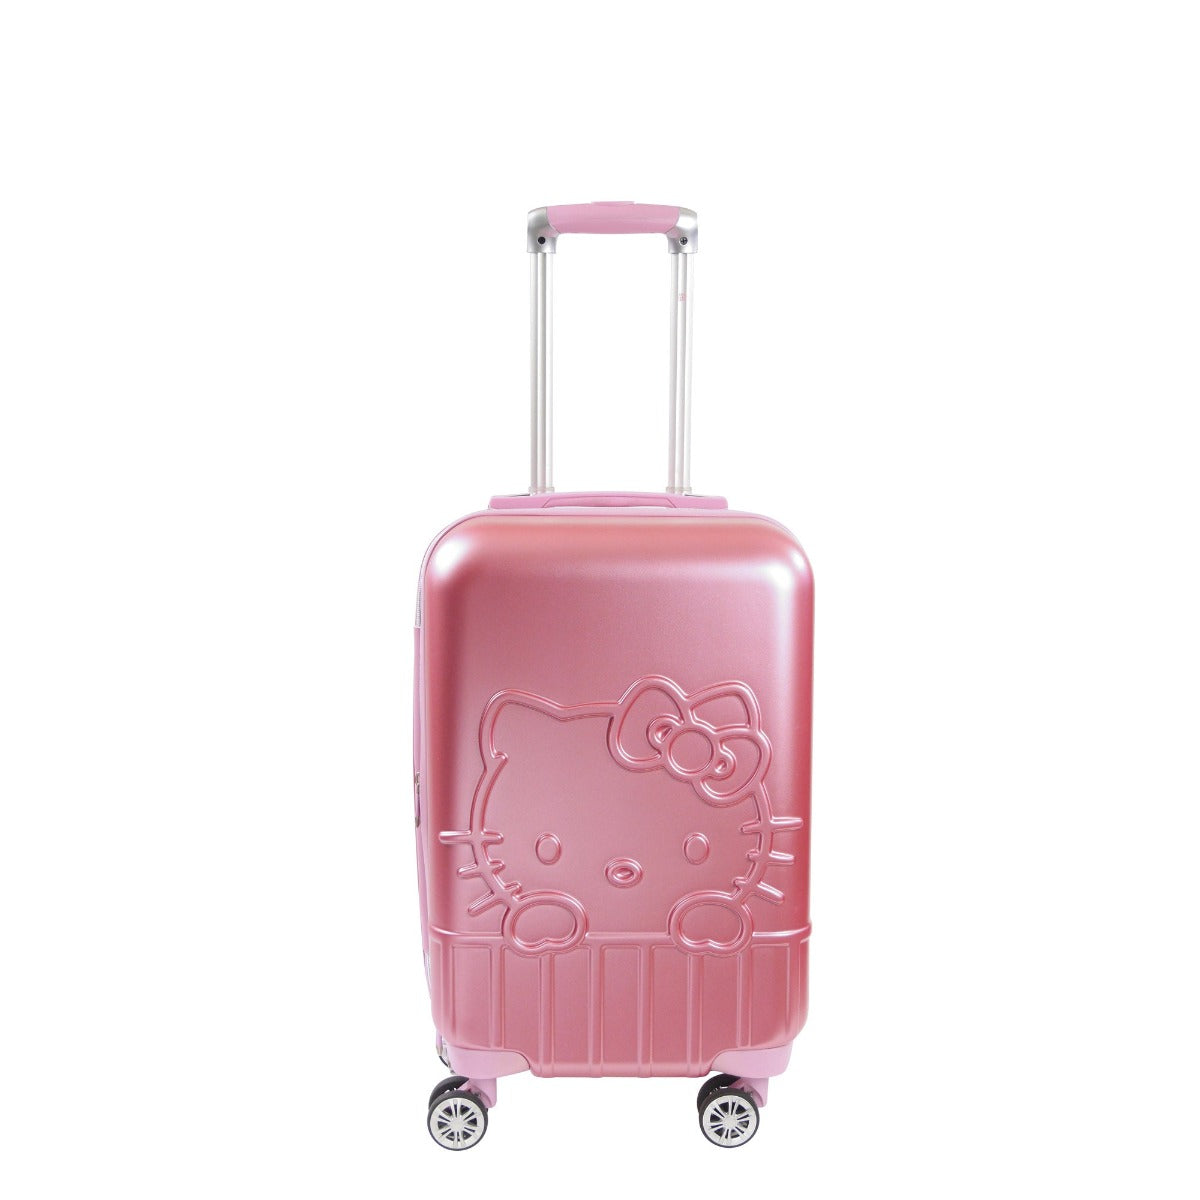 Shop Girls Hello Kitty Suitcase Cute Luggage – Luggage Factory